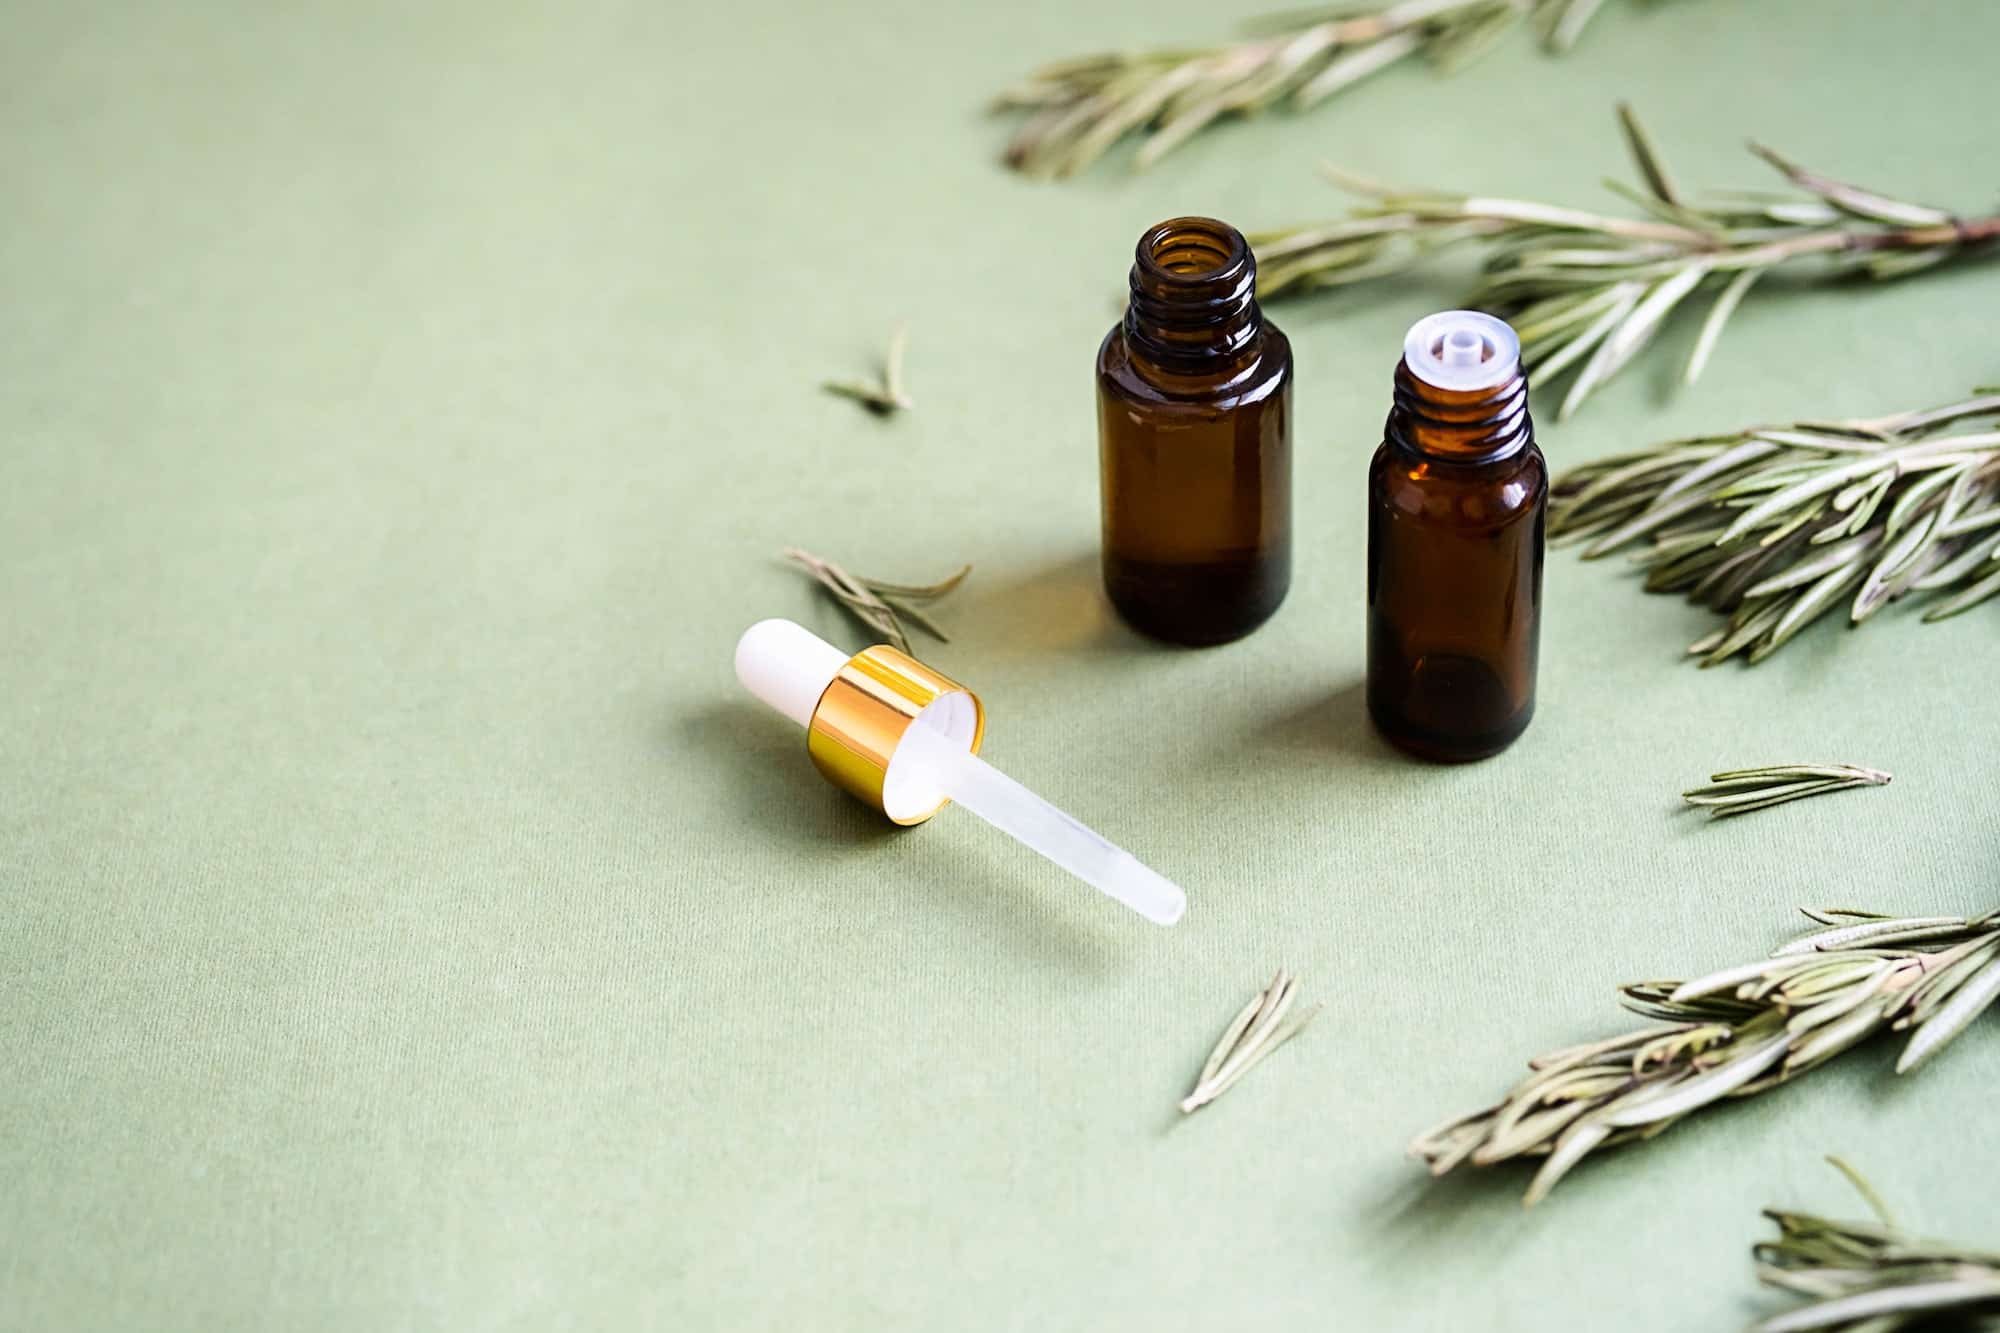 Rosemary Essential Oil Natural Selfcare Product.